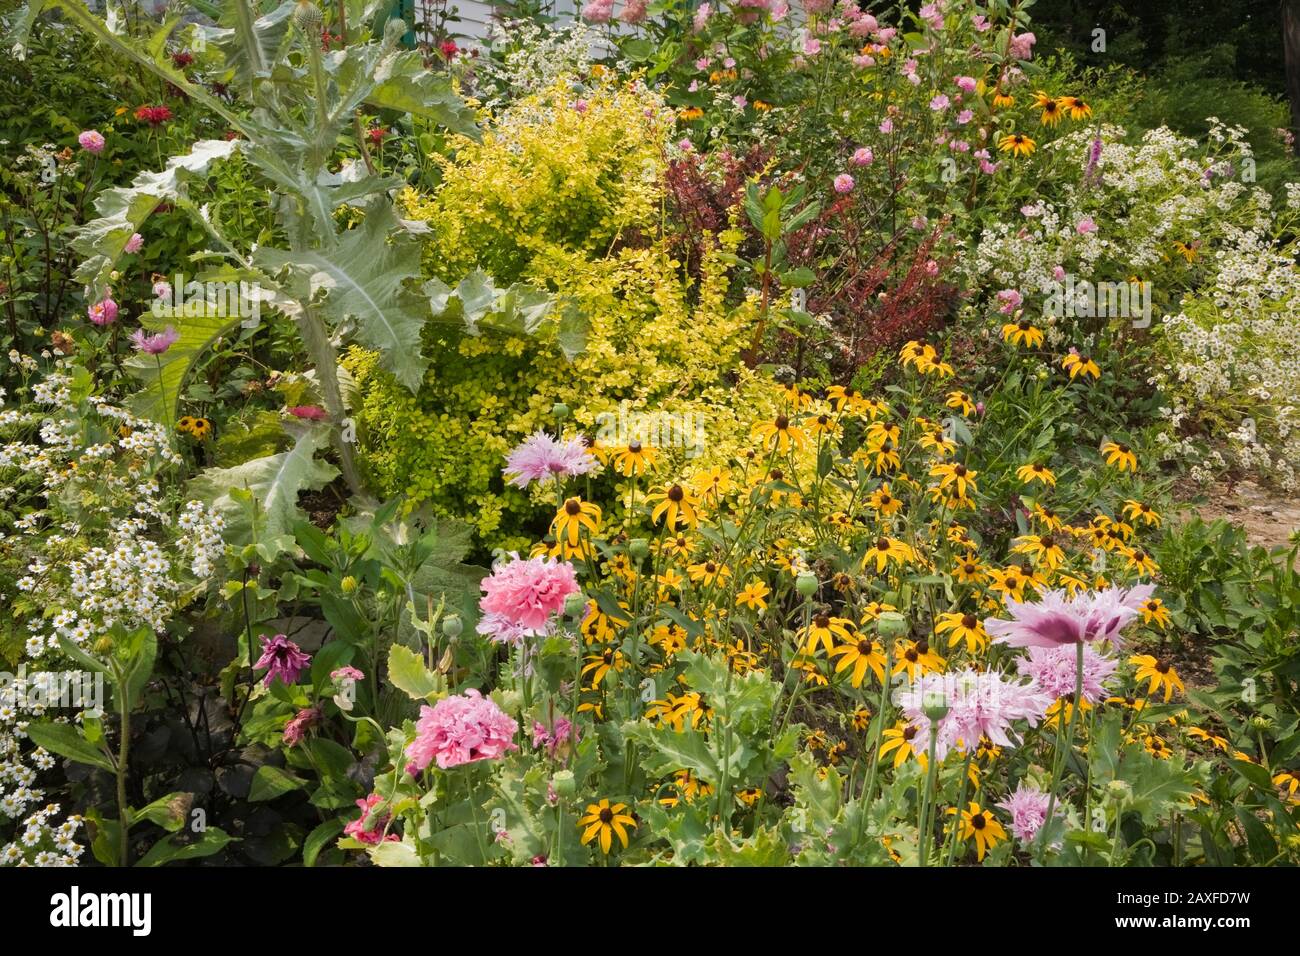 Border with Onopordum acanthium - Giant Thistle plant, yellow Rudbeckia 'Goldsturm' - Coneflowers and pink Filipendula 'Queen of the Prairie' flowers Stock Photo